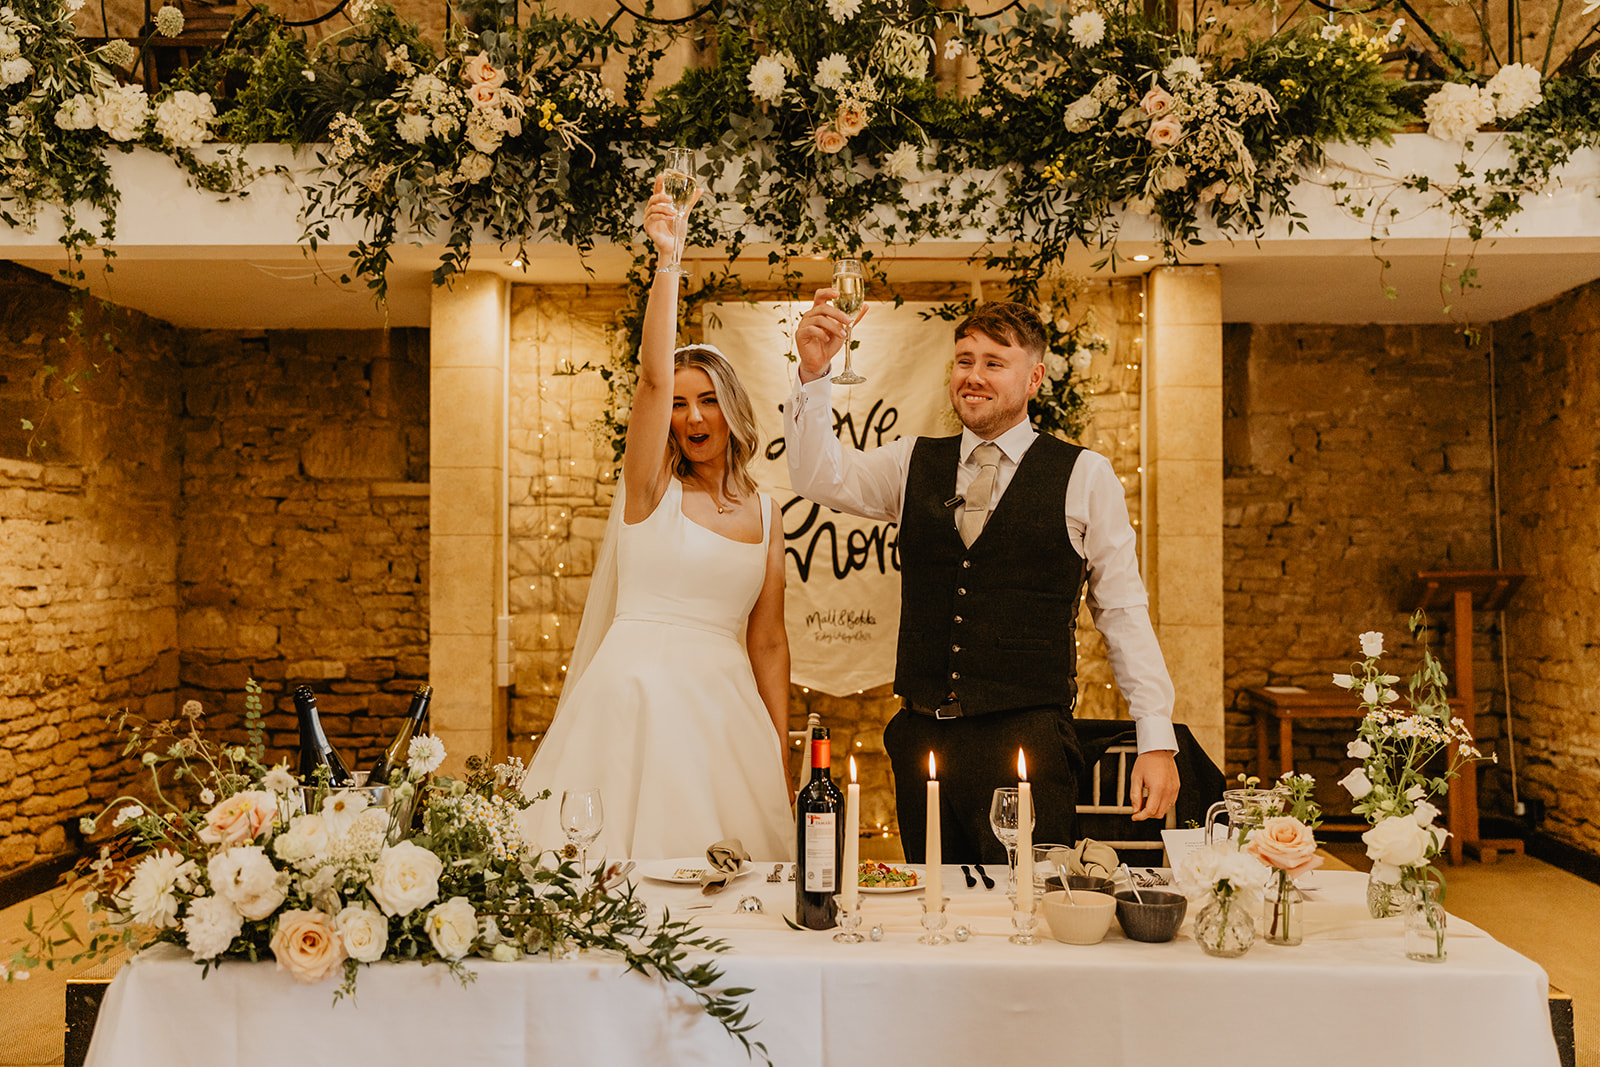 Bride and Groom at a Great Tythe Barn Wedding, Cotswolds. By Olive Joy Photography.